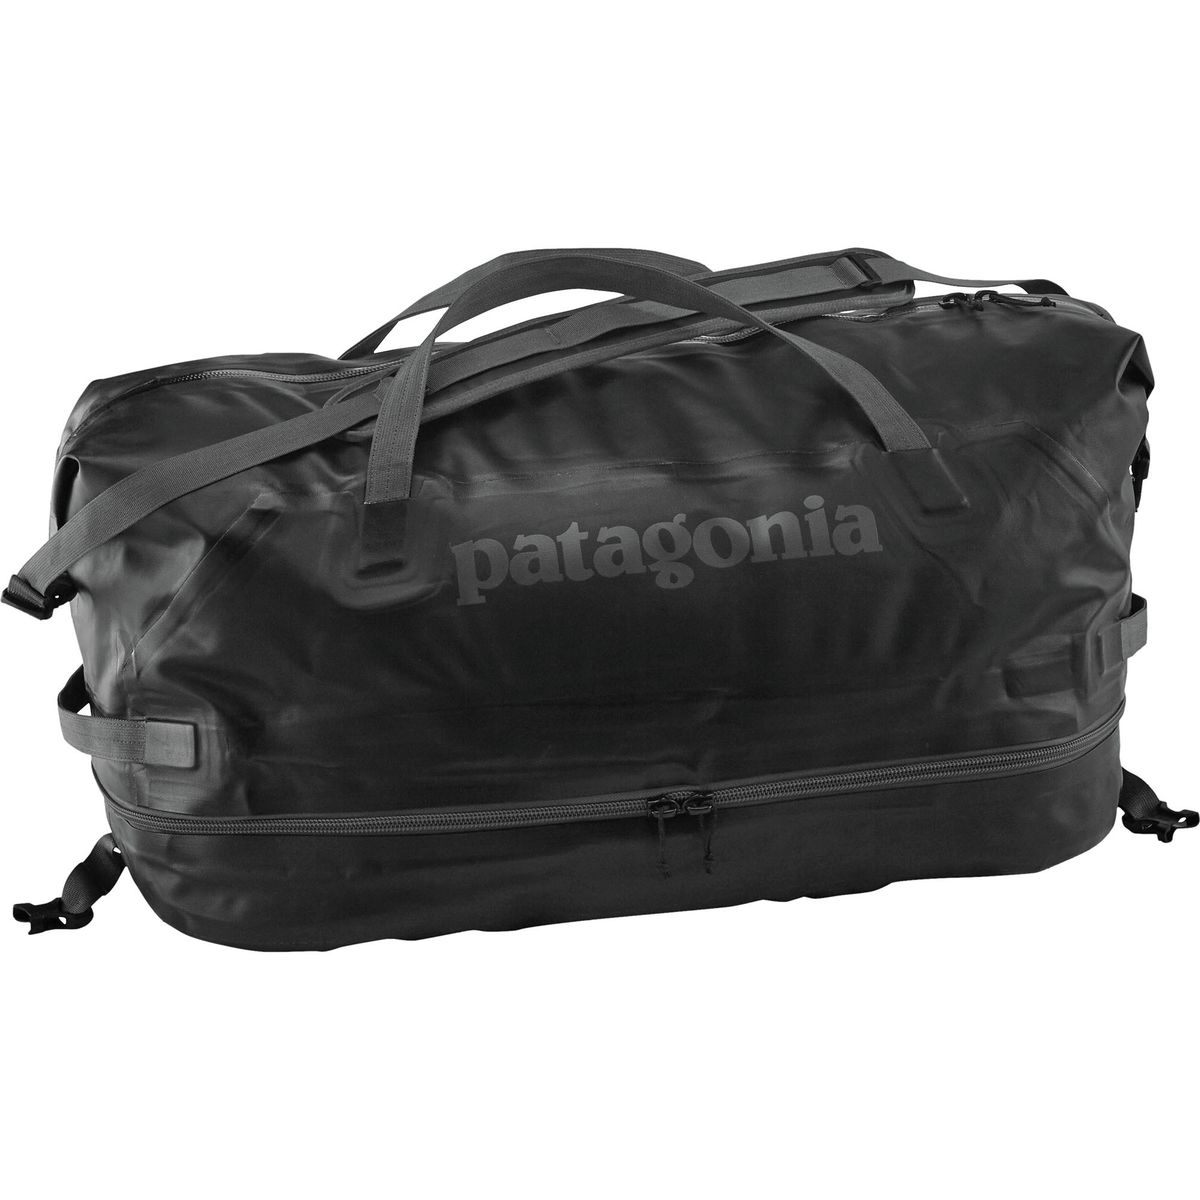 Patagonia Stormfront 65L Wet/Dry Duffel - Fly Fishing